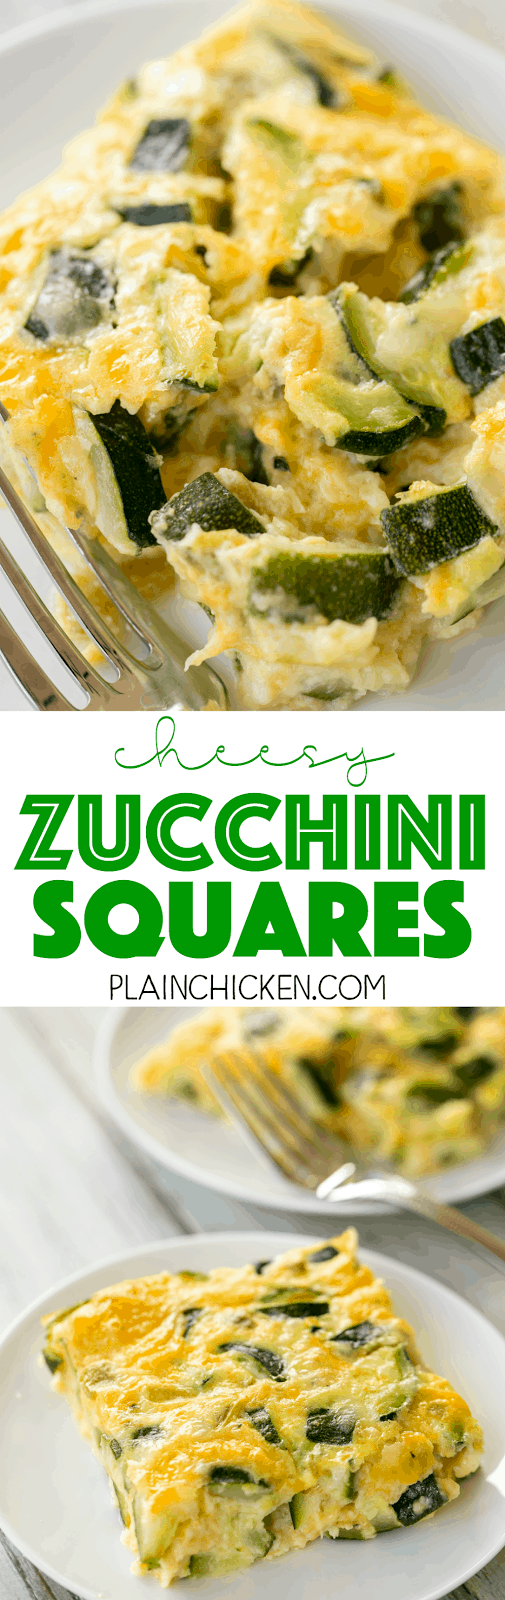 Cheesy Zucchini Squares - DELICIOUS side dish or breakfast casserole! Perfect way to use up all that yummy summer squash! Zucchini, flour, baking powder, milk, eggs, green chiles and Monterey Jack cheese. We served this as a side dish with our grilled meats and had the leftovers for breakfast! SO YUMMY! Everyone raves about this simple side dish recipe!